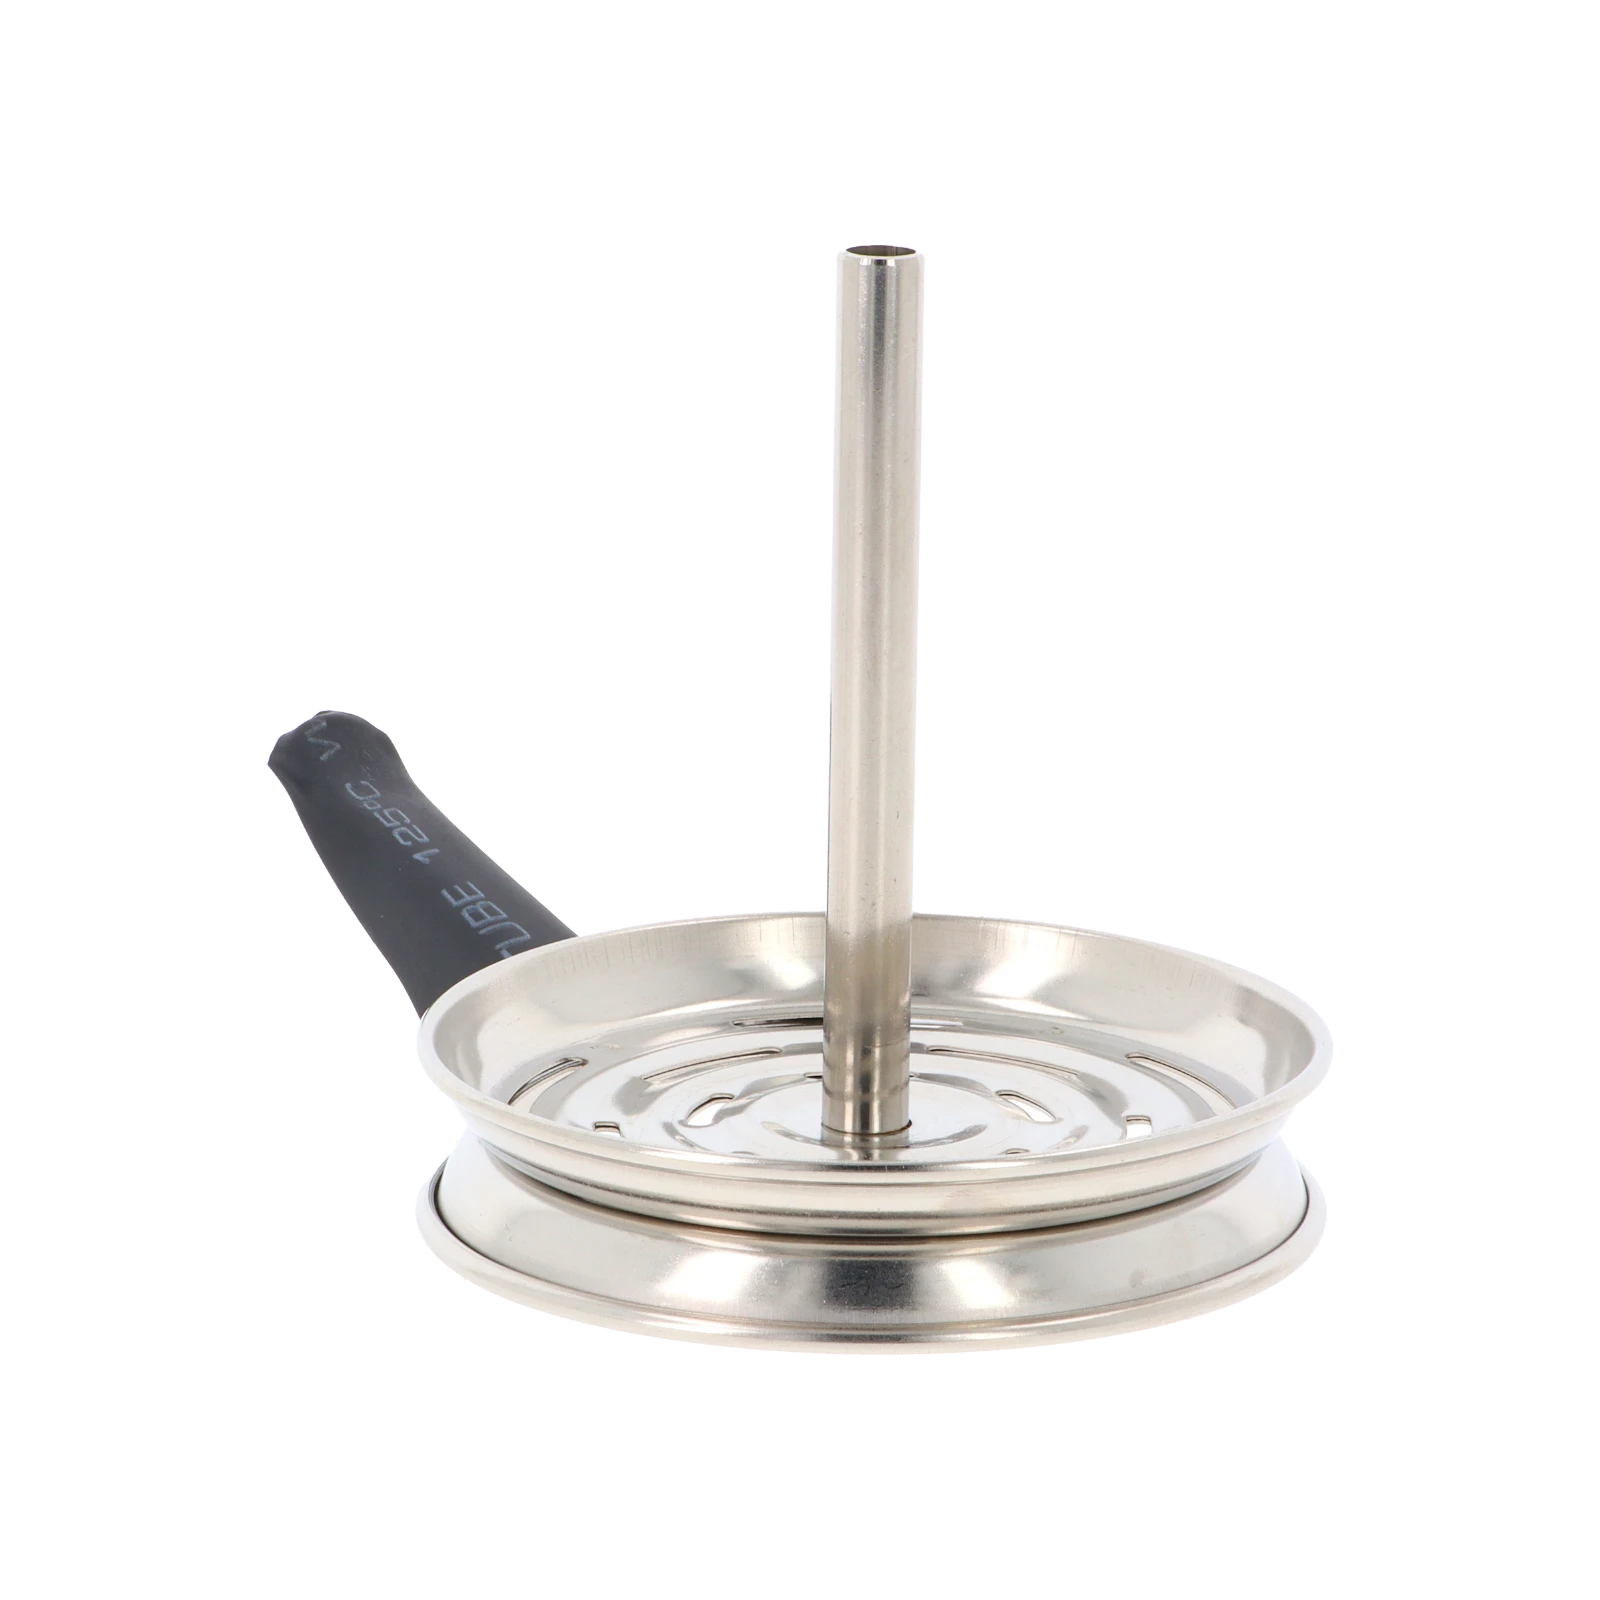 AO - Pan Chimney Adapter - Stainless Steel - Silver